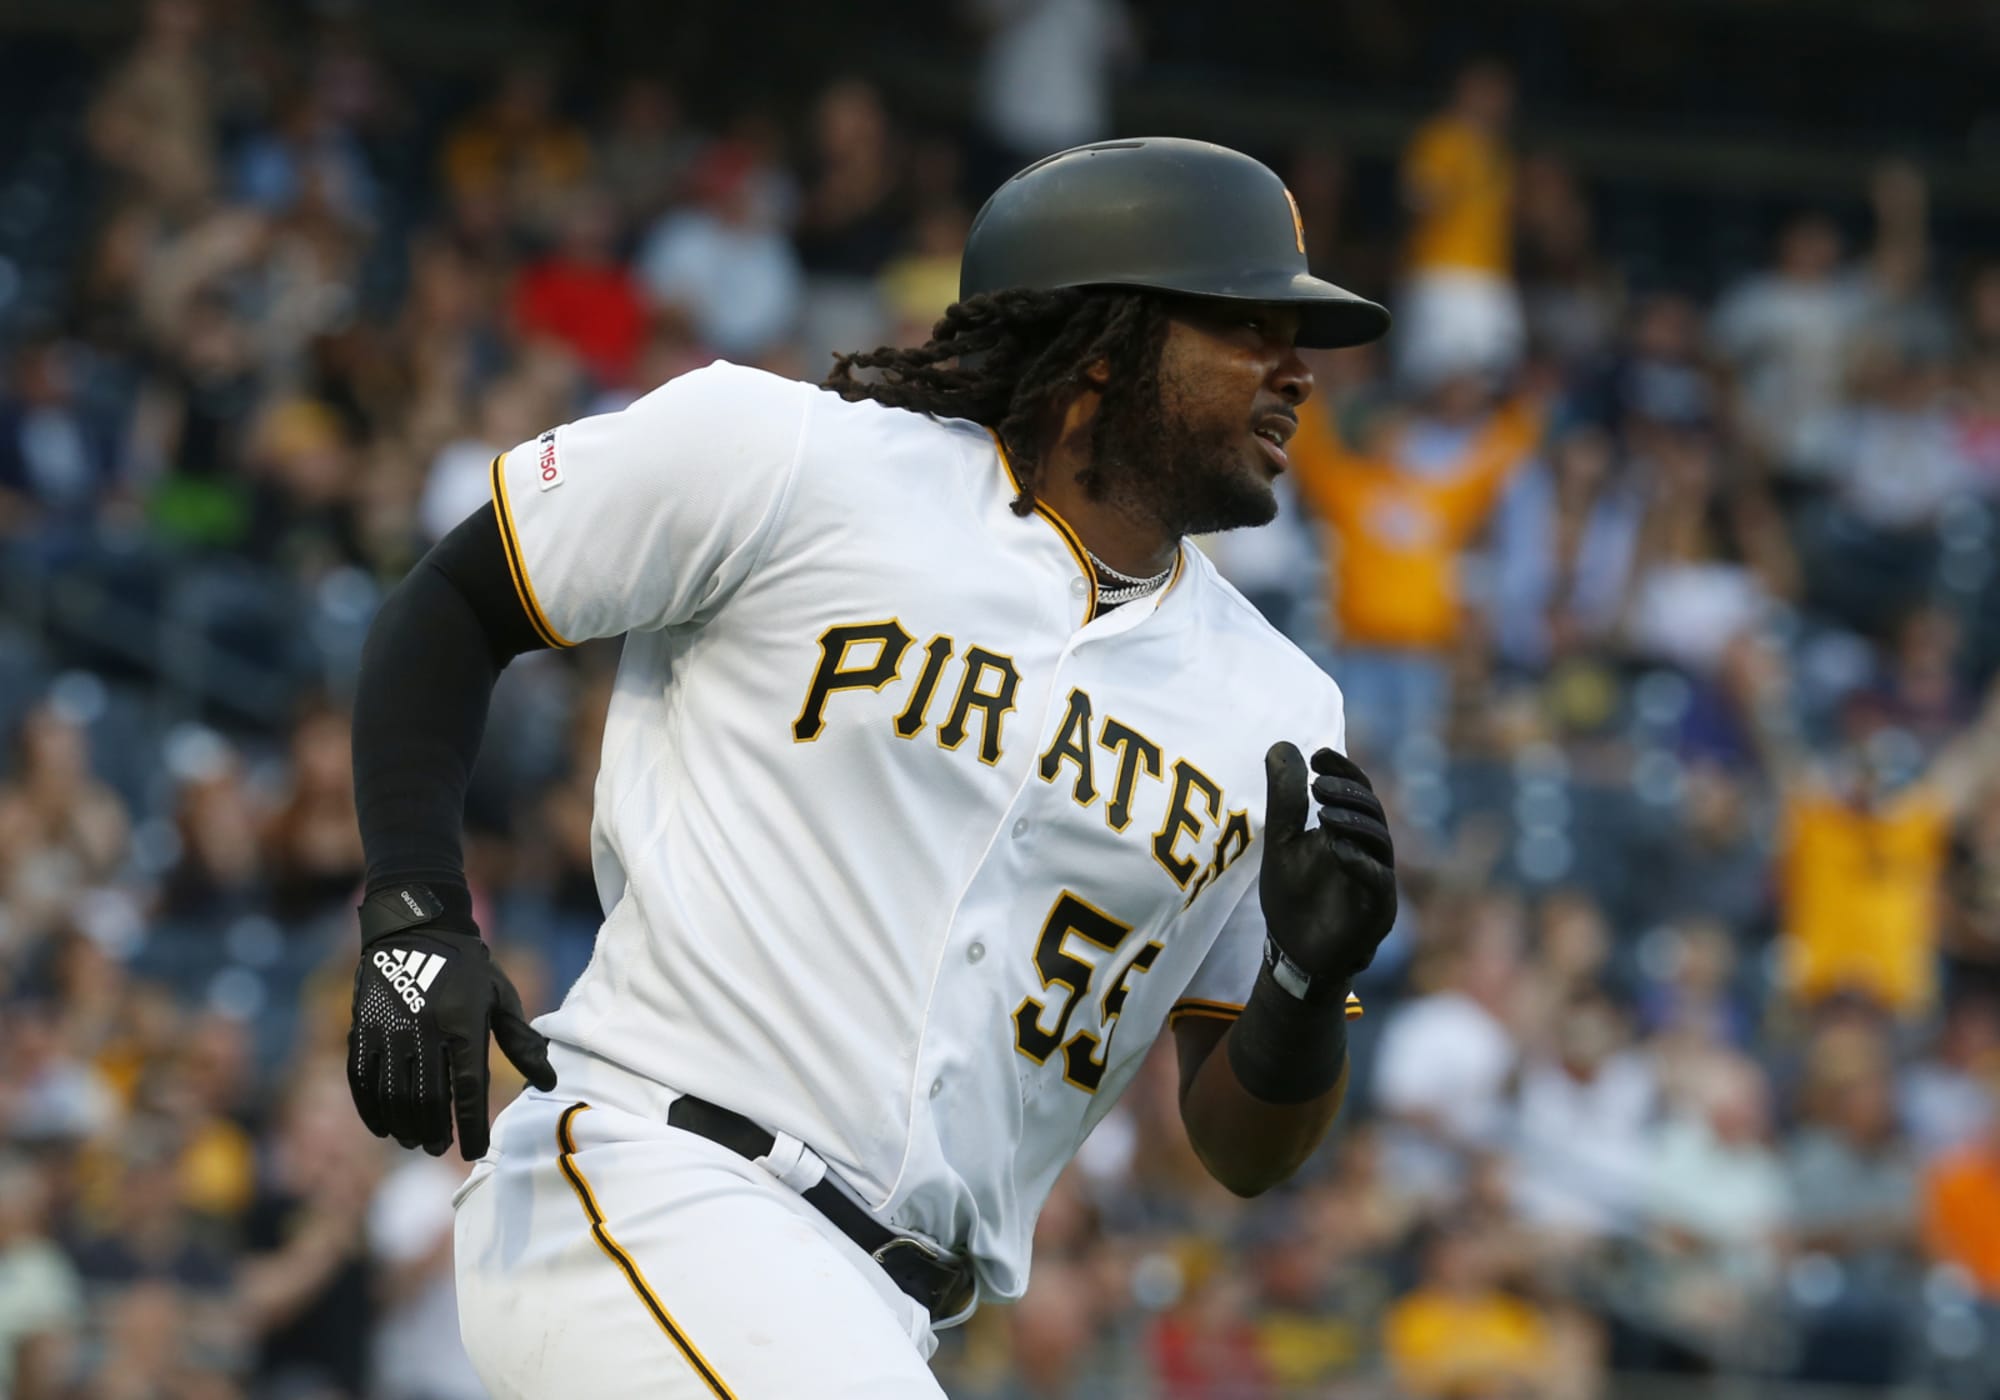 Pittsburgh Pirates: Team preview and prediction for 2020 season